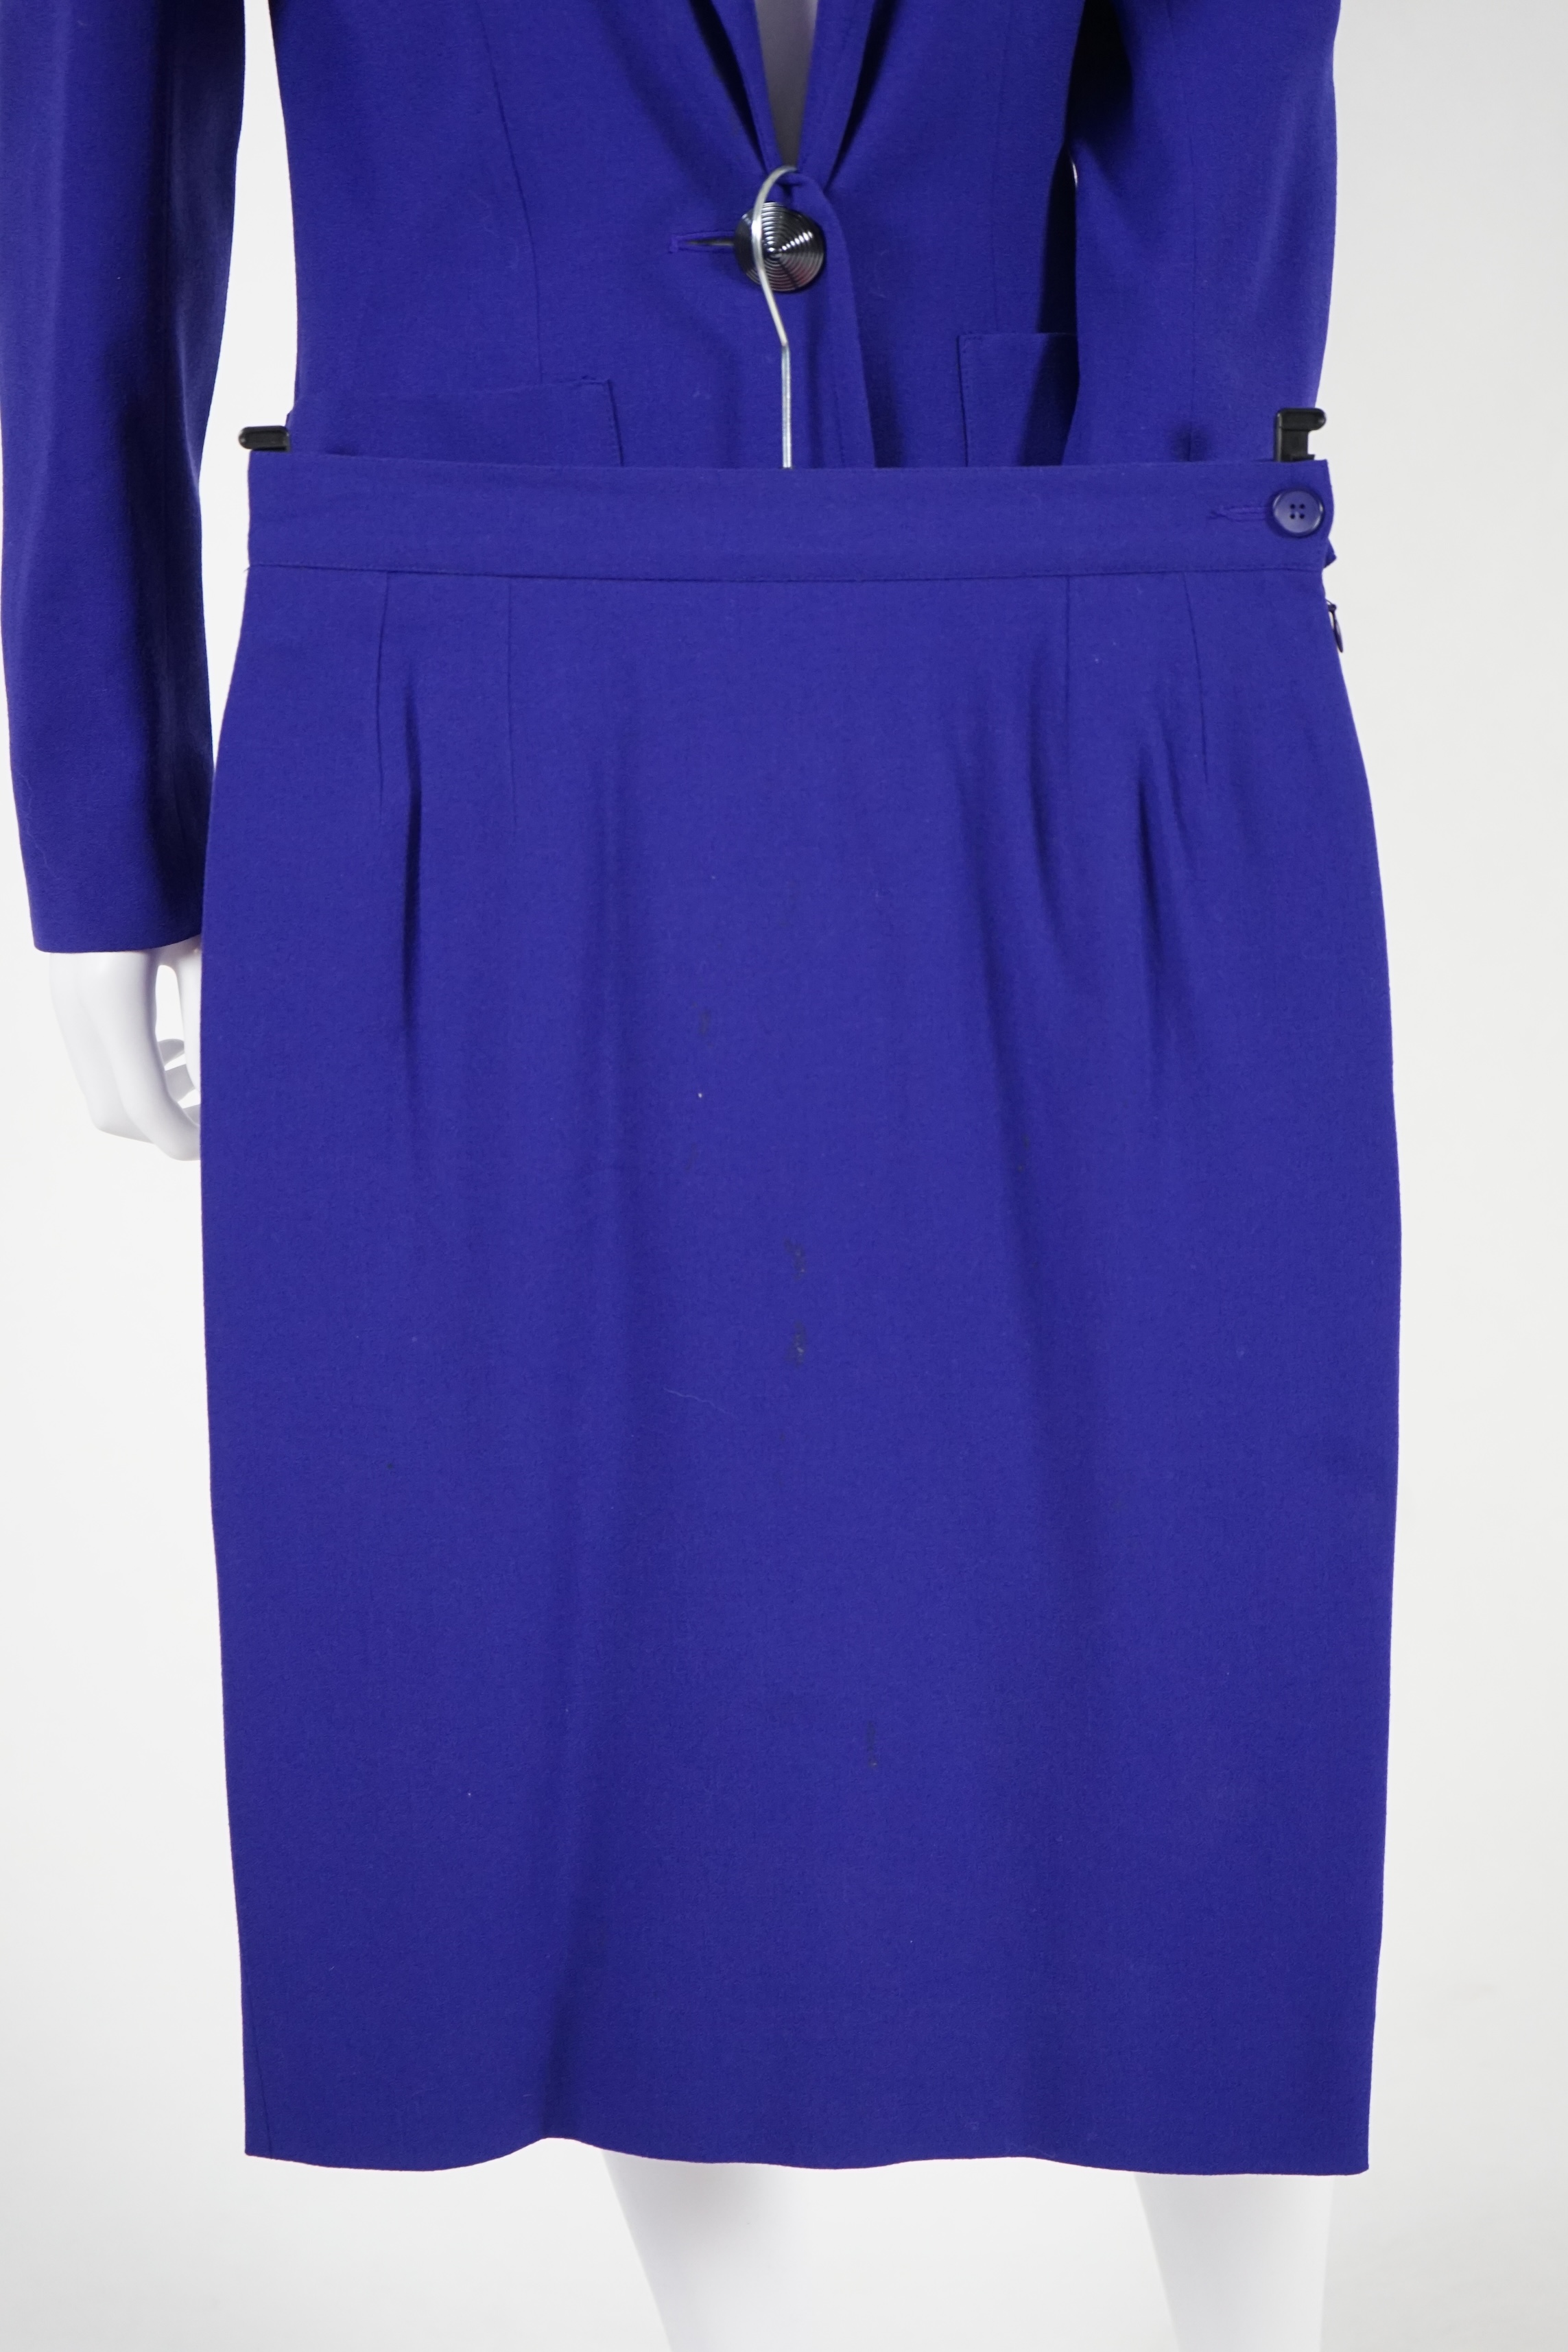 Three vintage Yves Saint Laurent variation lady's skirt suits, F 38 (UK 10). Please note alterations to make the waist smaller may have been carried out on some of the skirts. Proceeds to Happy Paws Puppy Rescue.